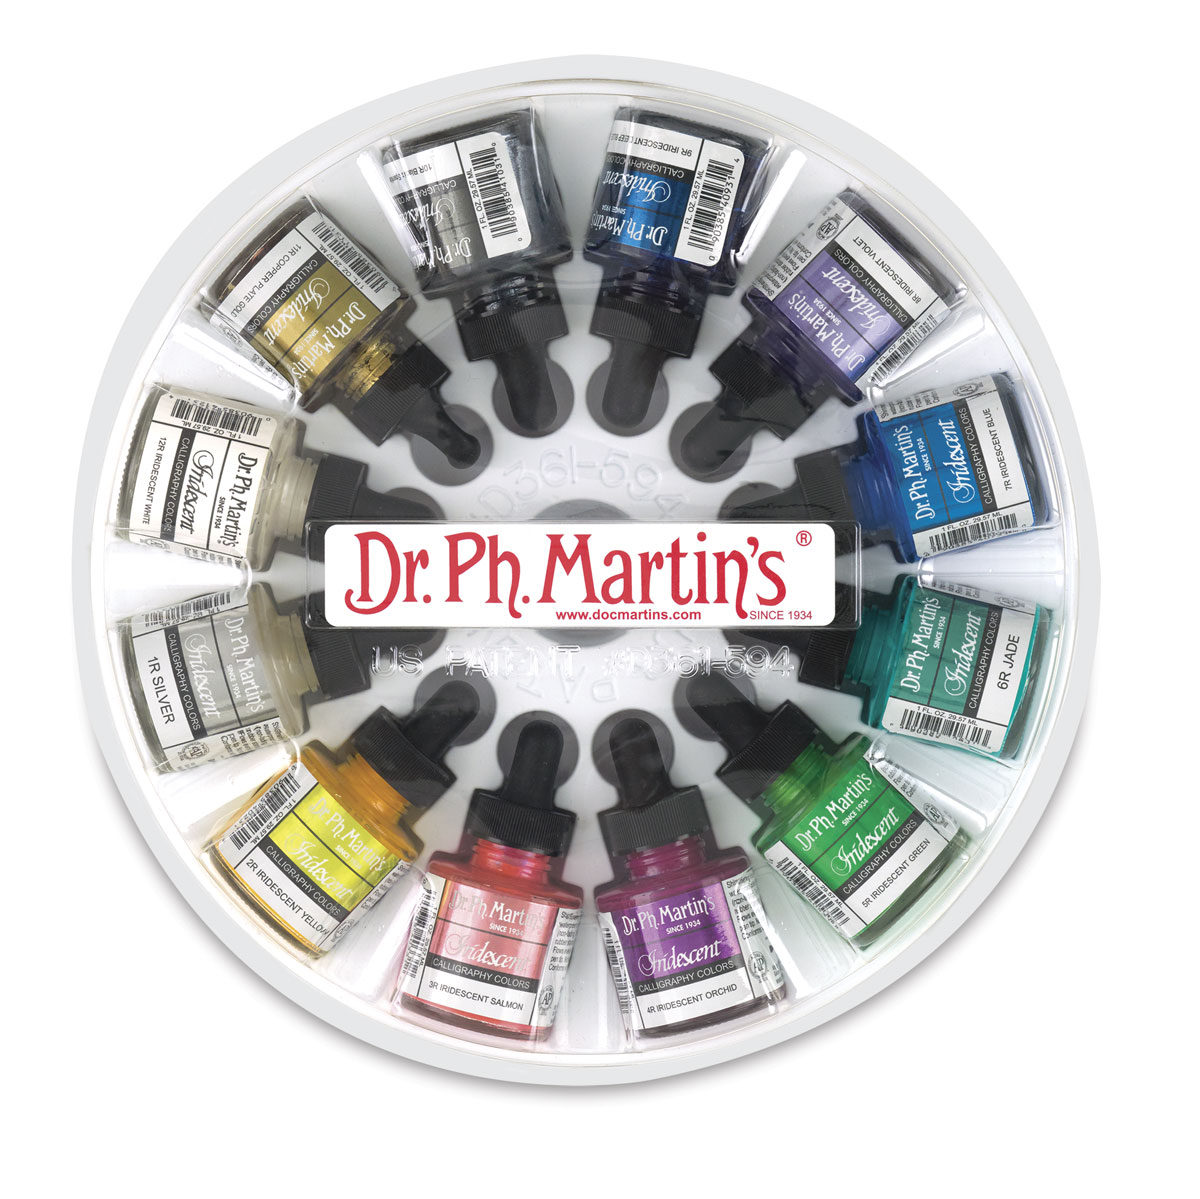 Dr. Ph. Martin's Iridescent Calligraphy Inks and Sets | BLICK Art